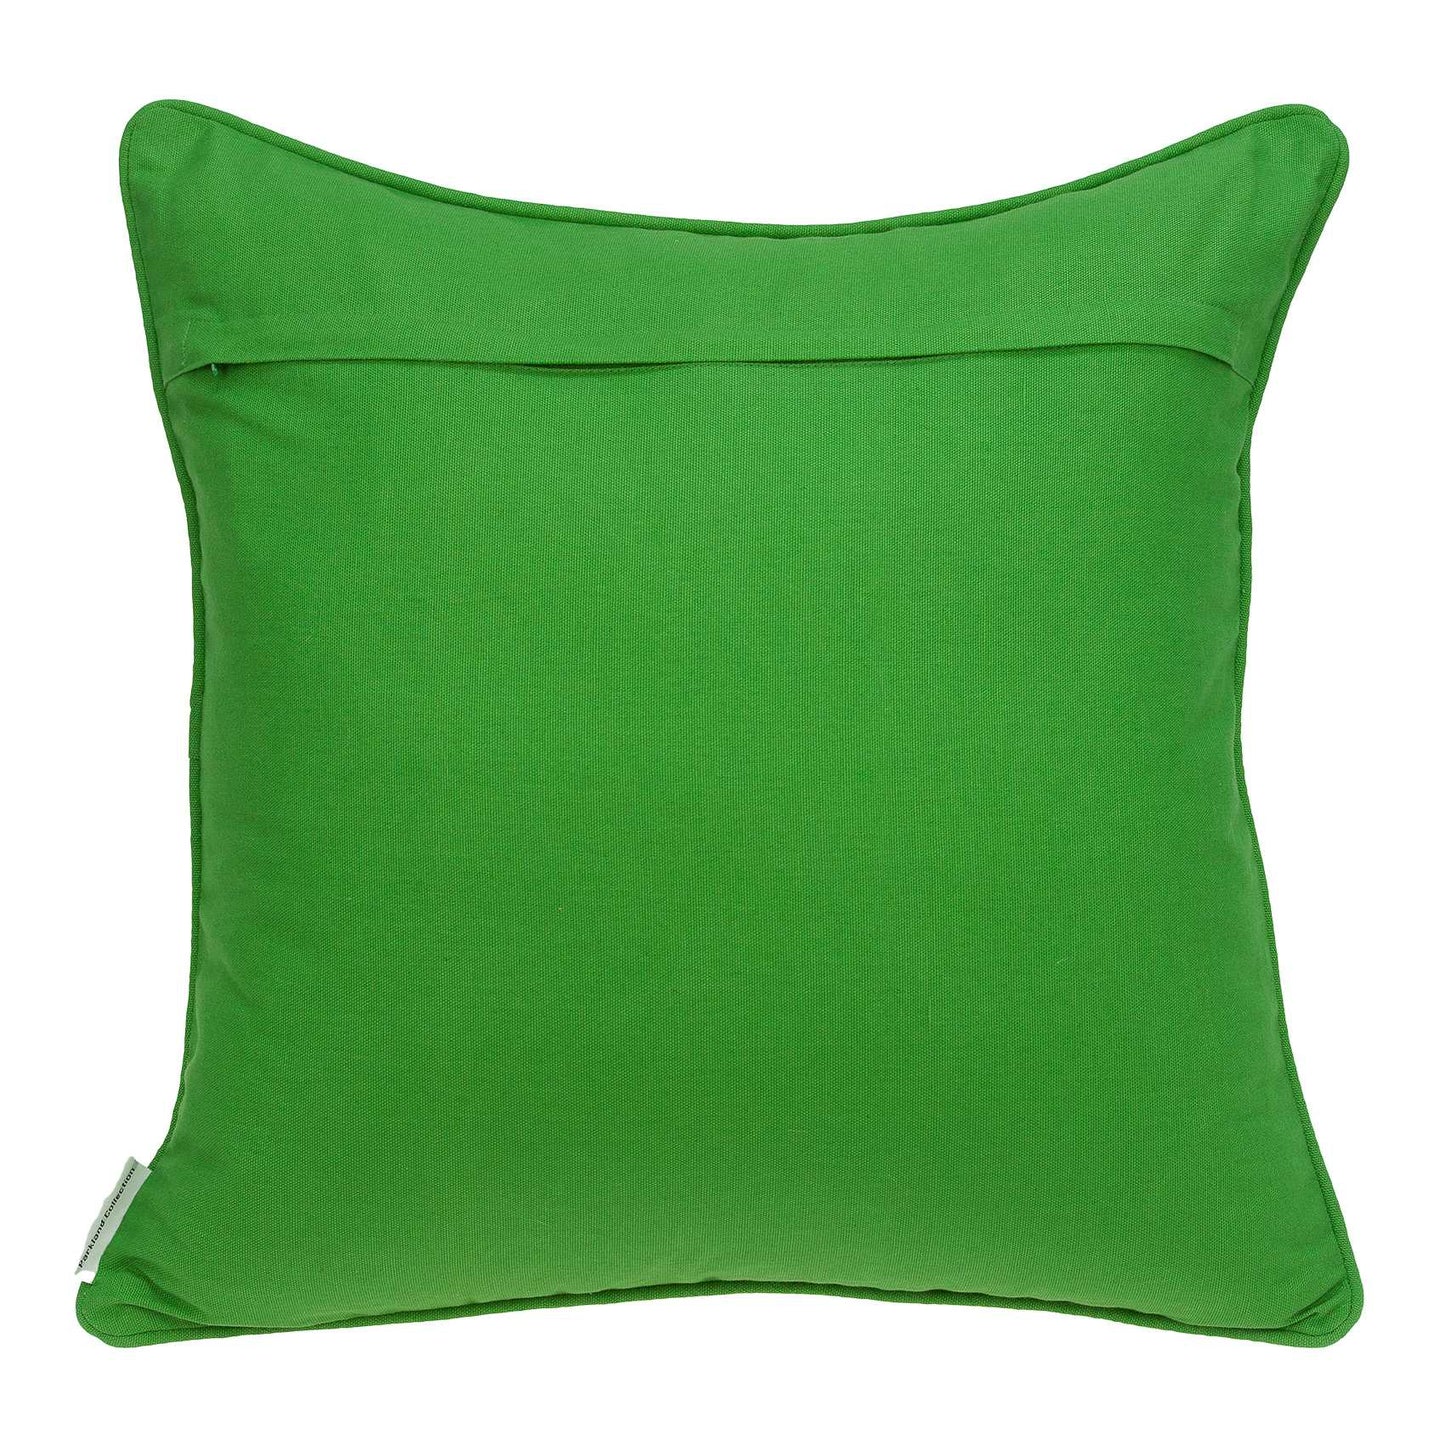 20inches x 7inches x 20inches Transitional Green and White Pillow